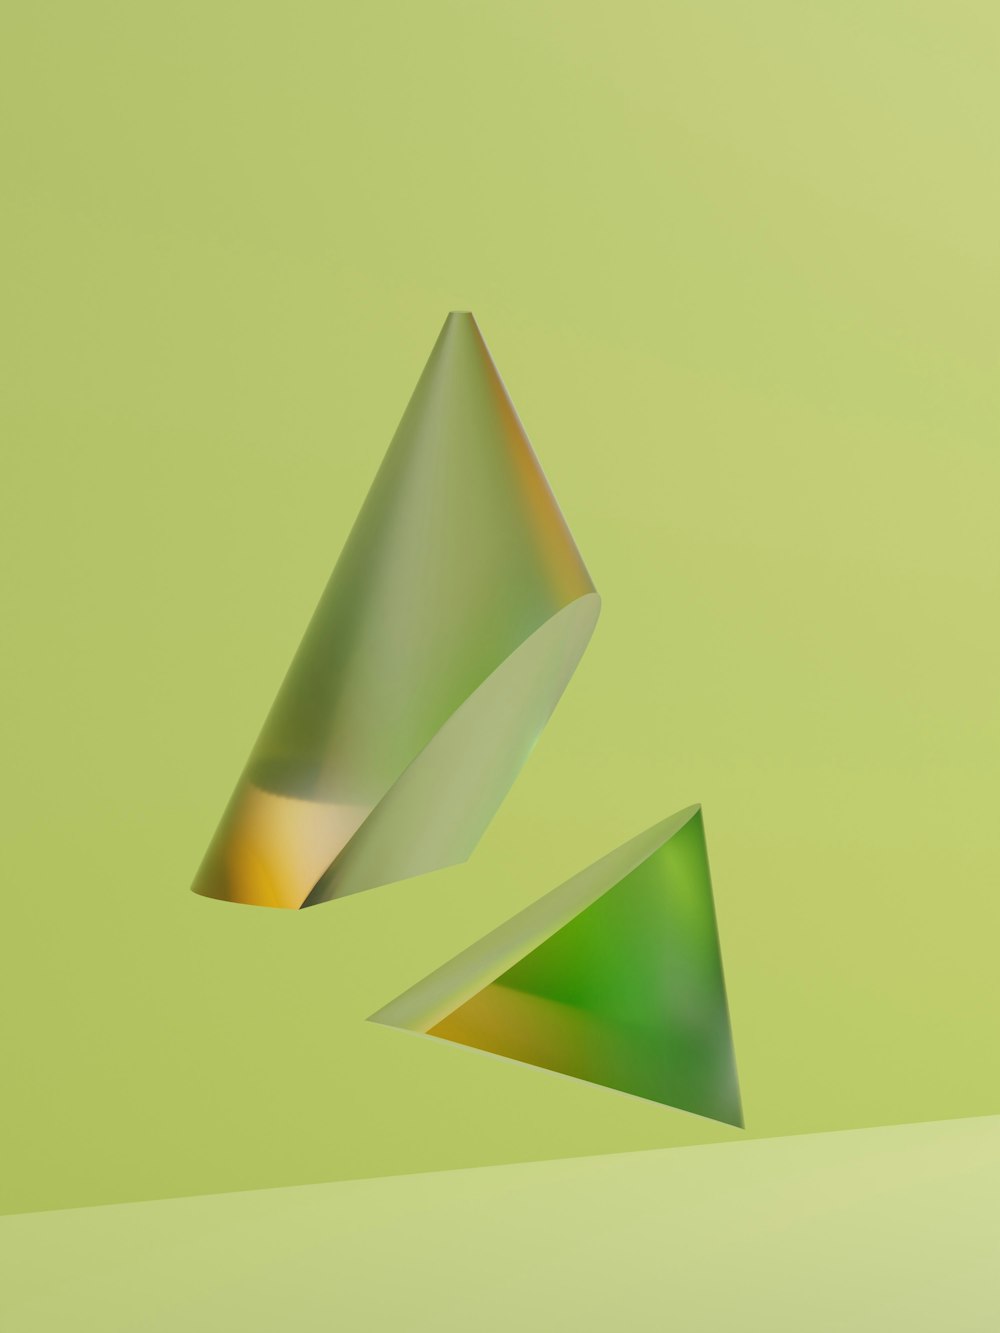 a green and yellow background with two triangular shapes